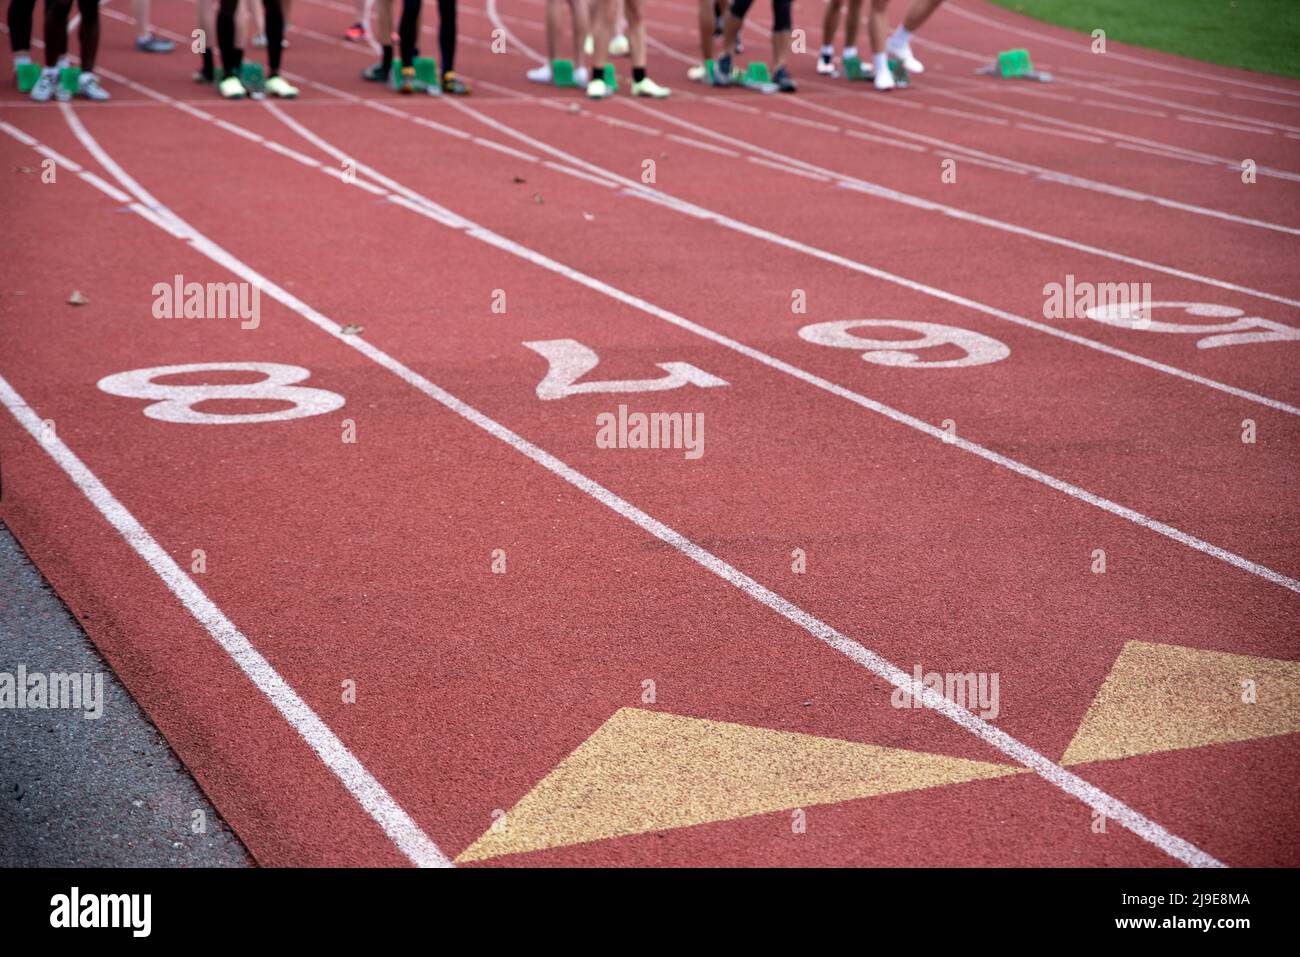 Runners at the starting line of an athletic racing track with lane markings Stock Photo